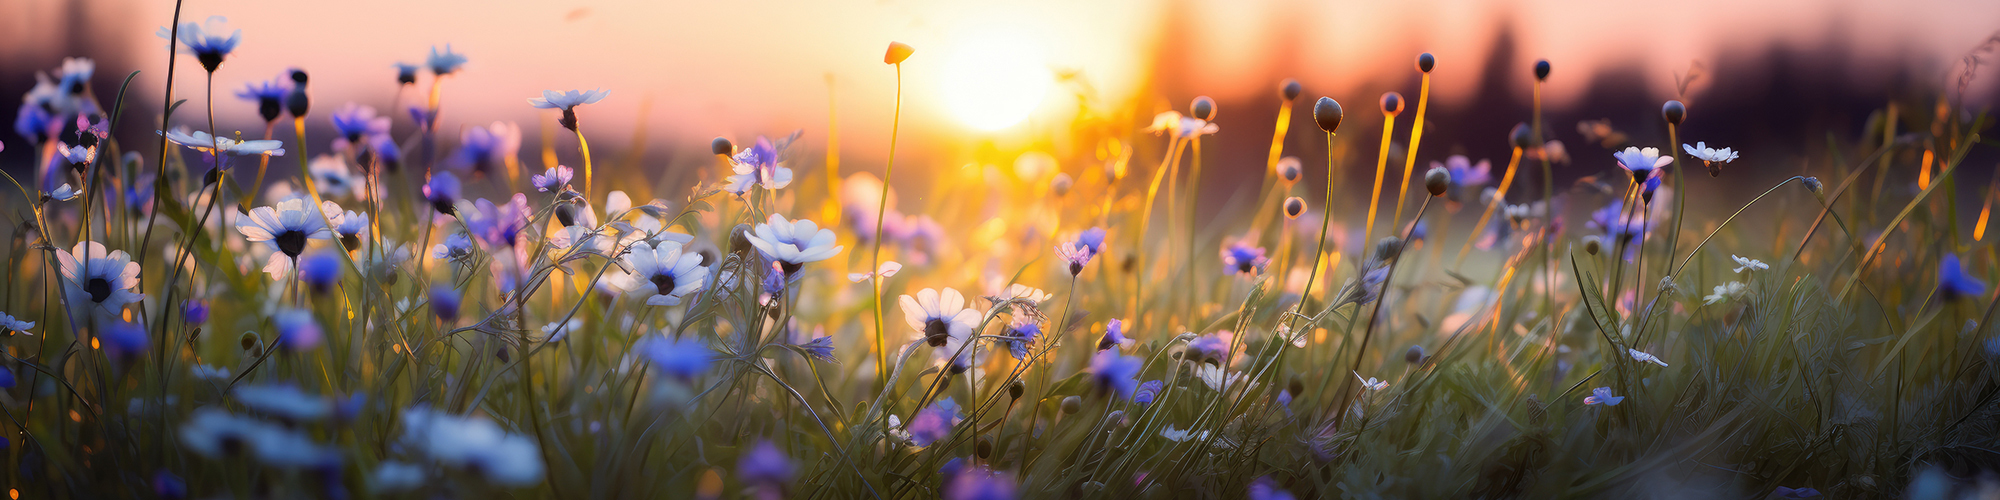 flowers and grass in a countryside at sunset time springtime